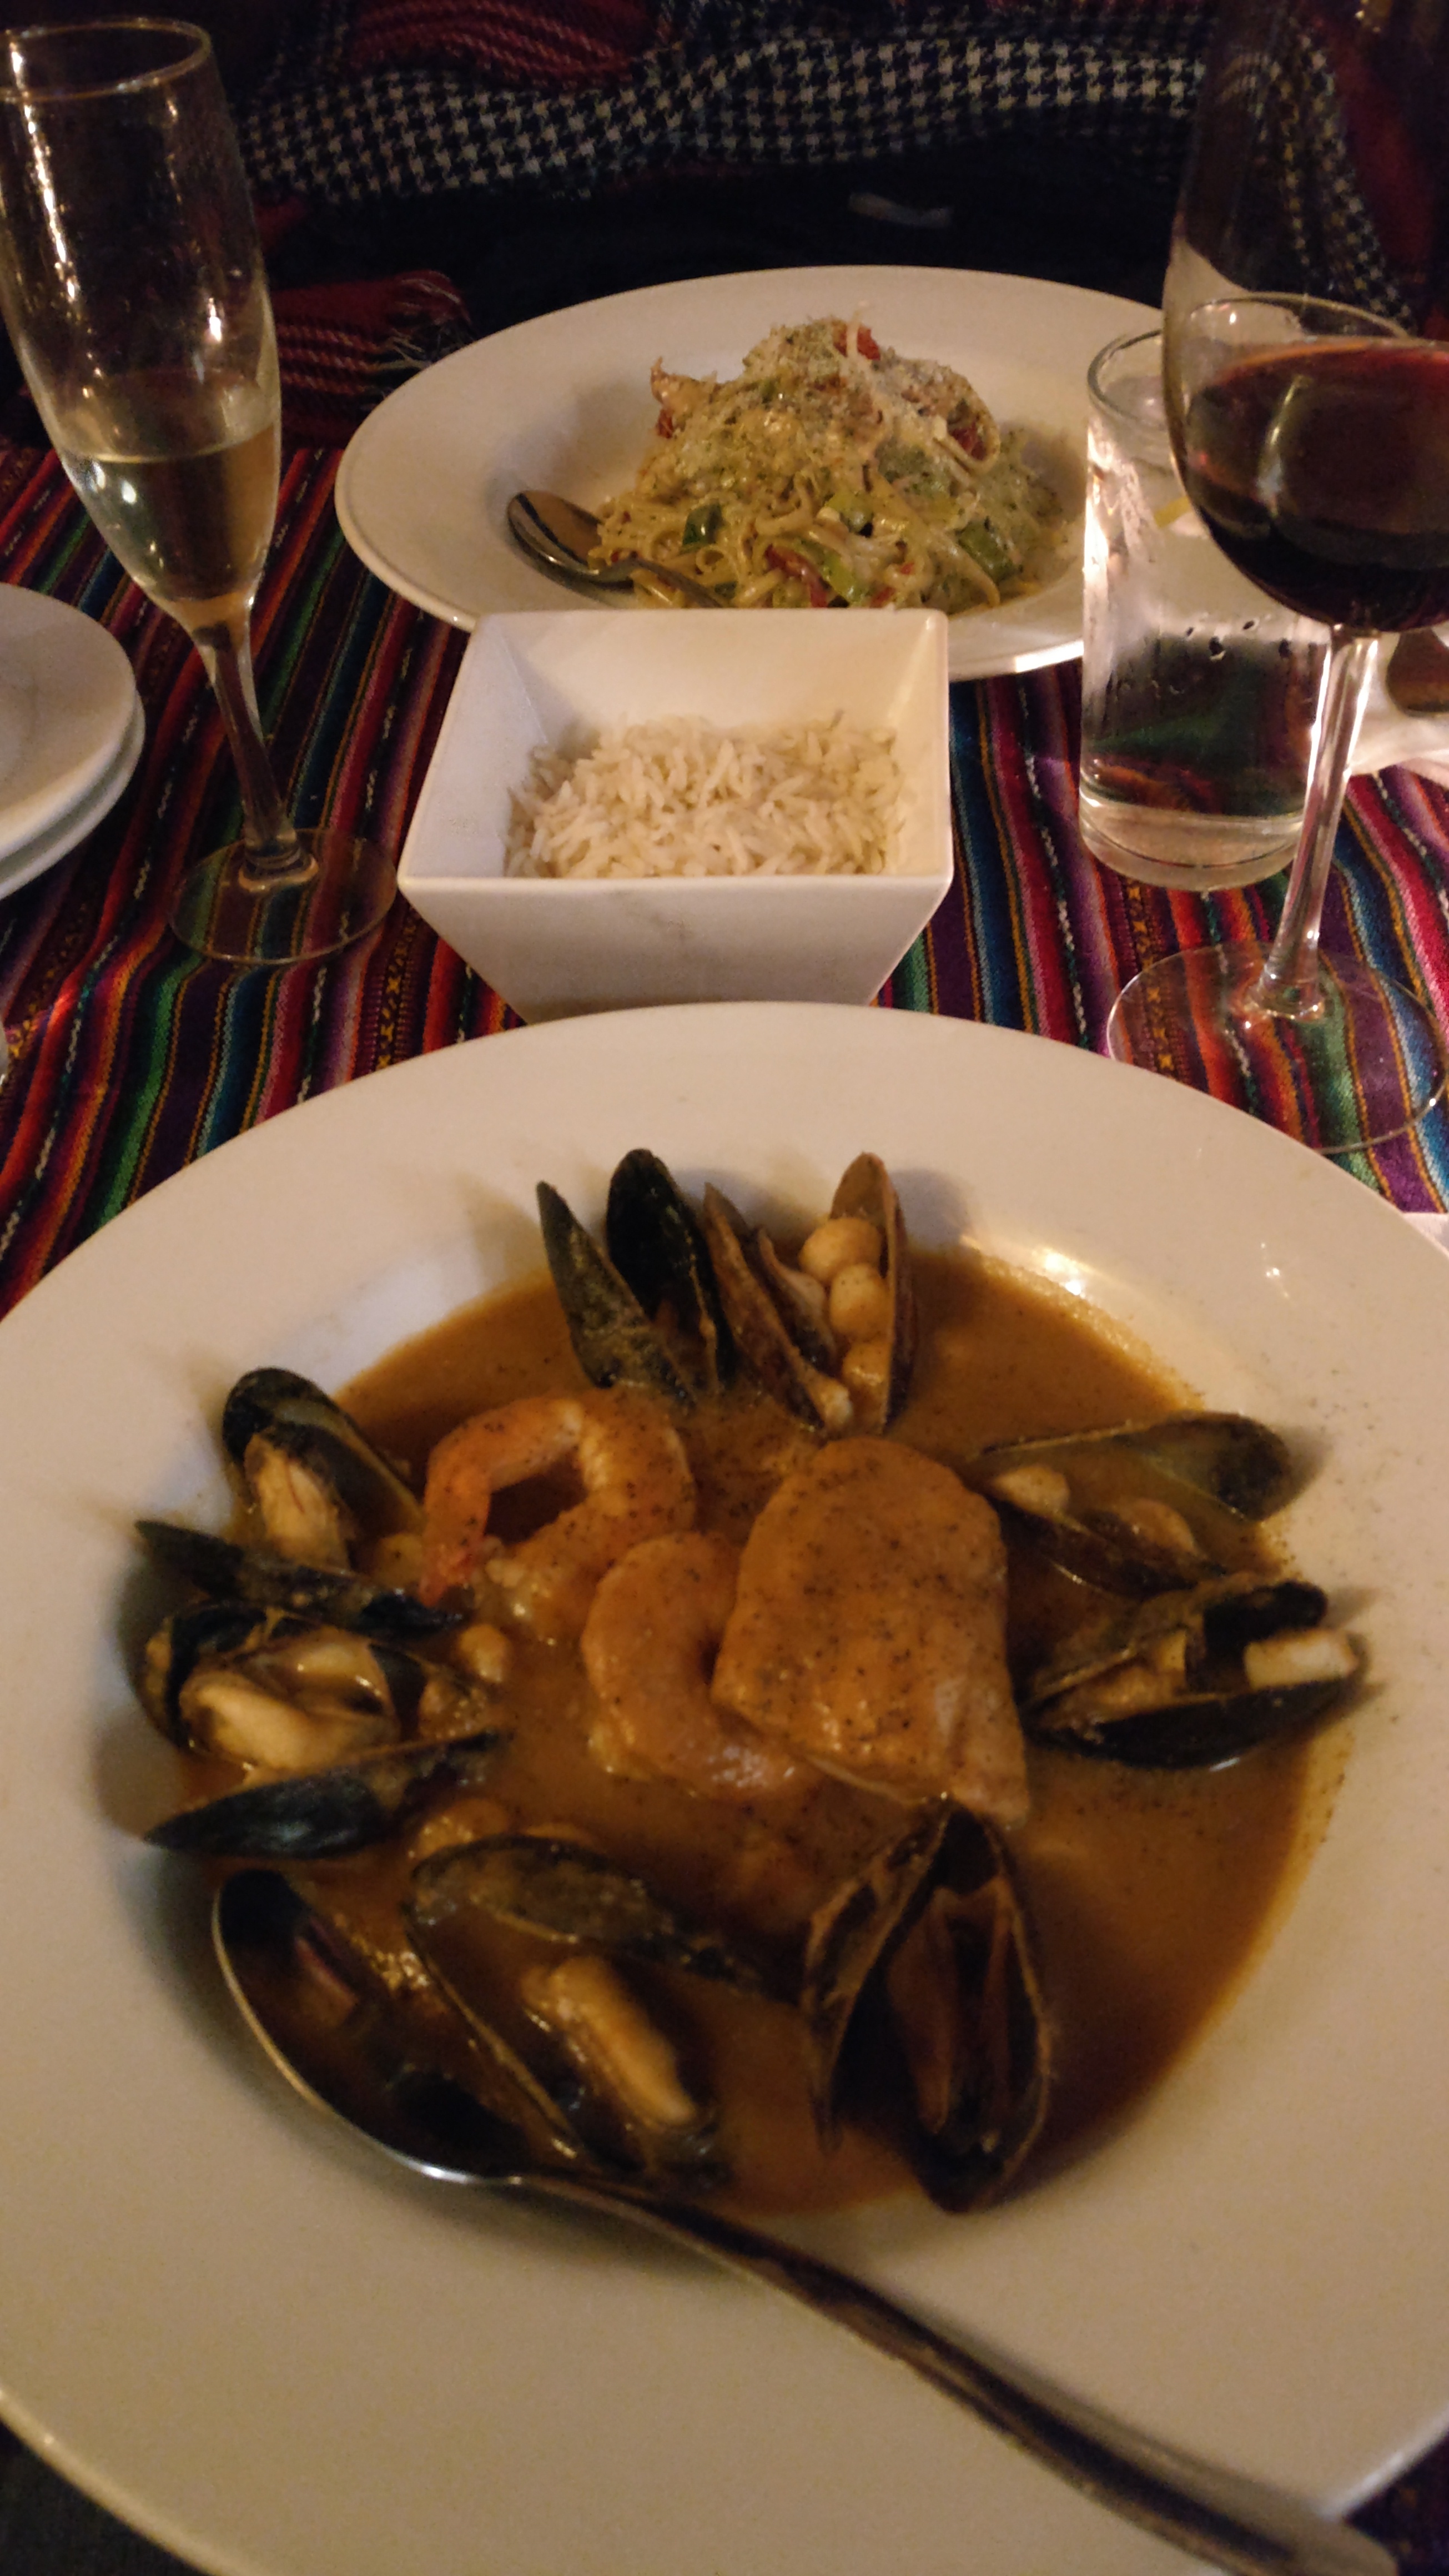 Bouillabaisse with mussels, scallops, shrimp, and fish, and a nest of pasta in the background